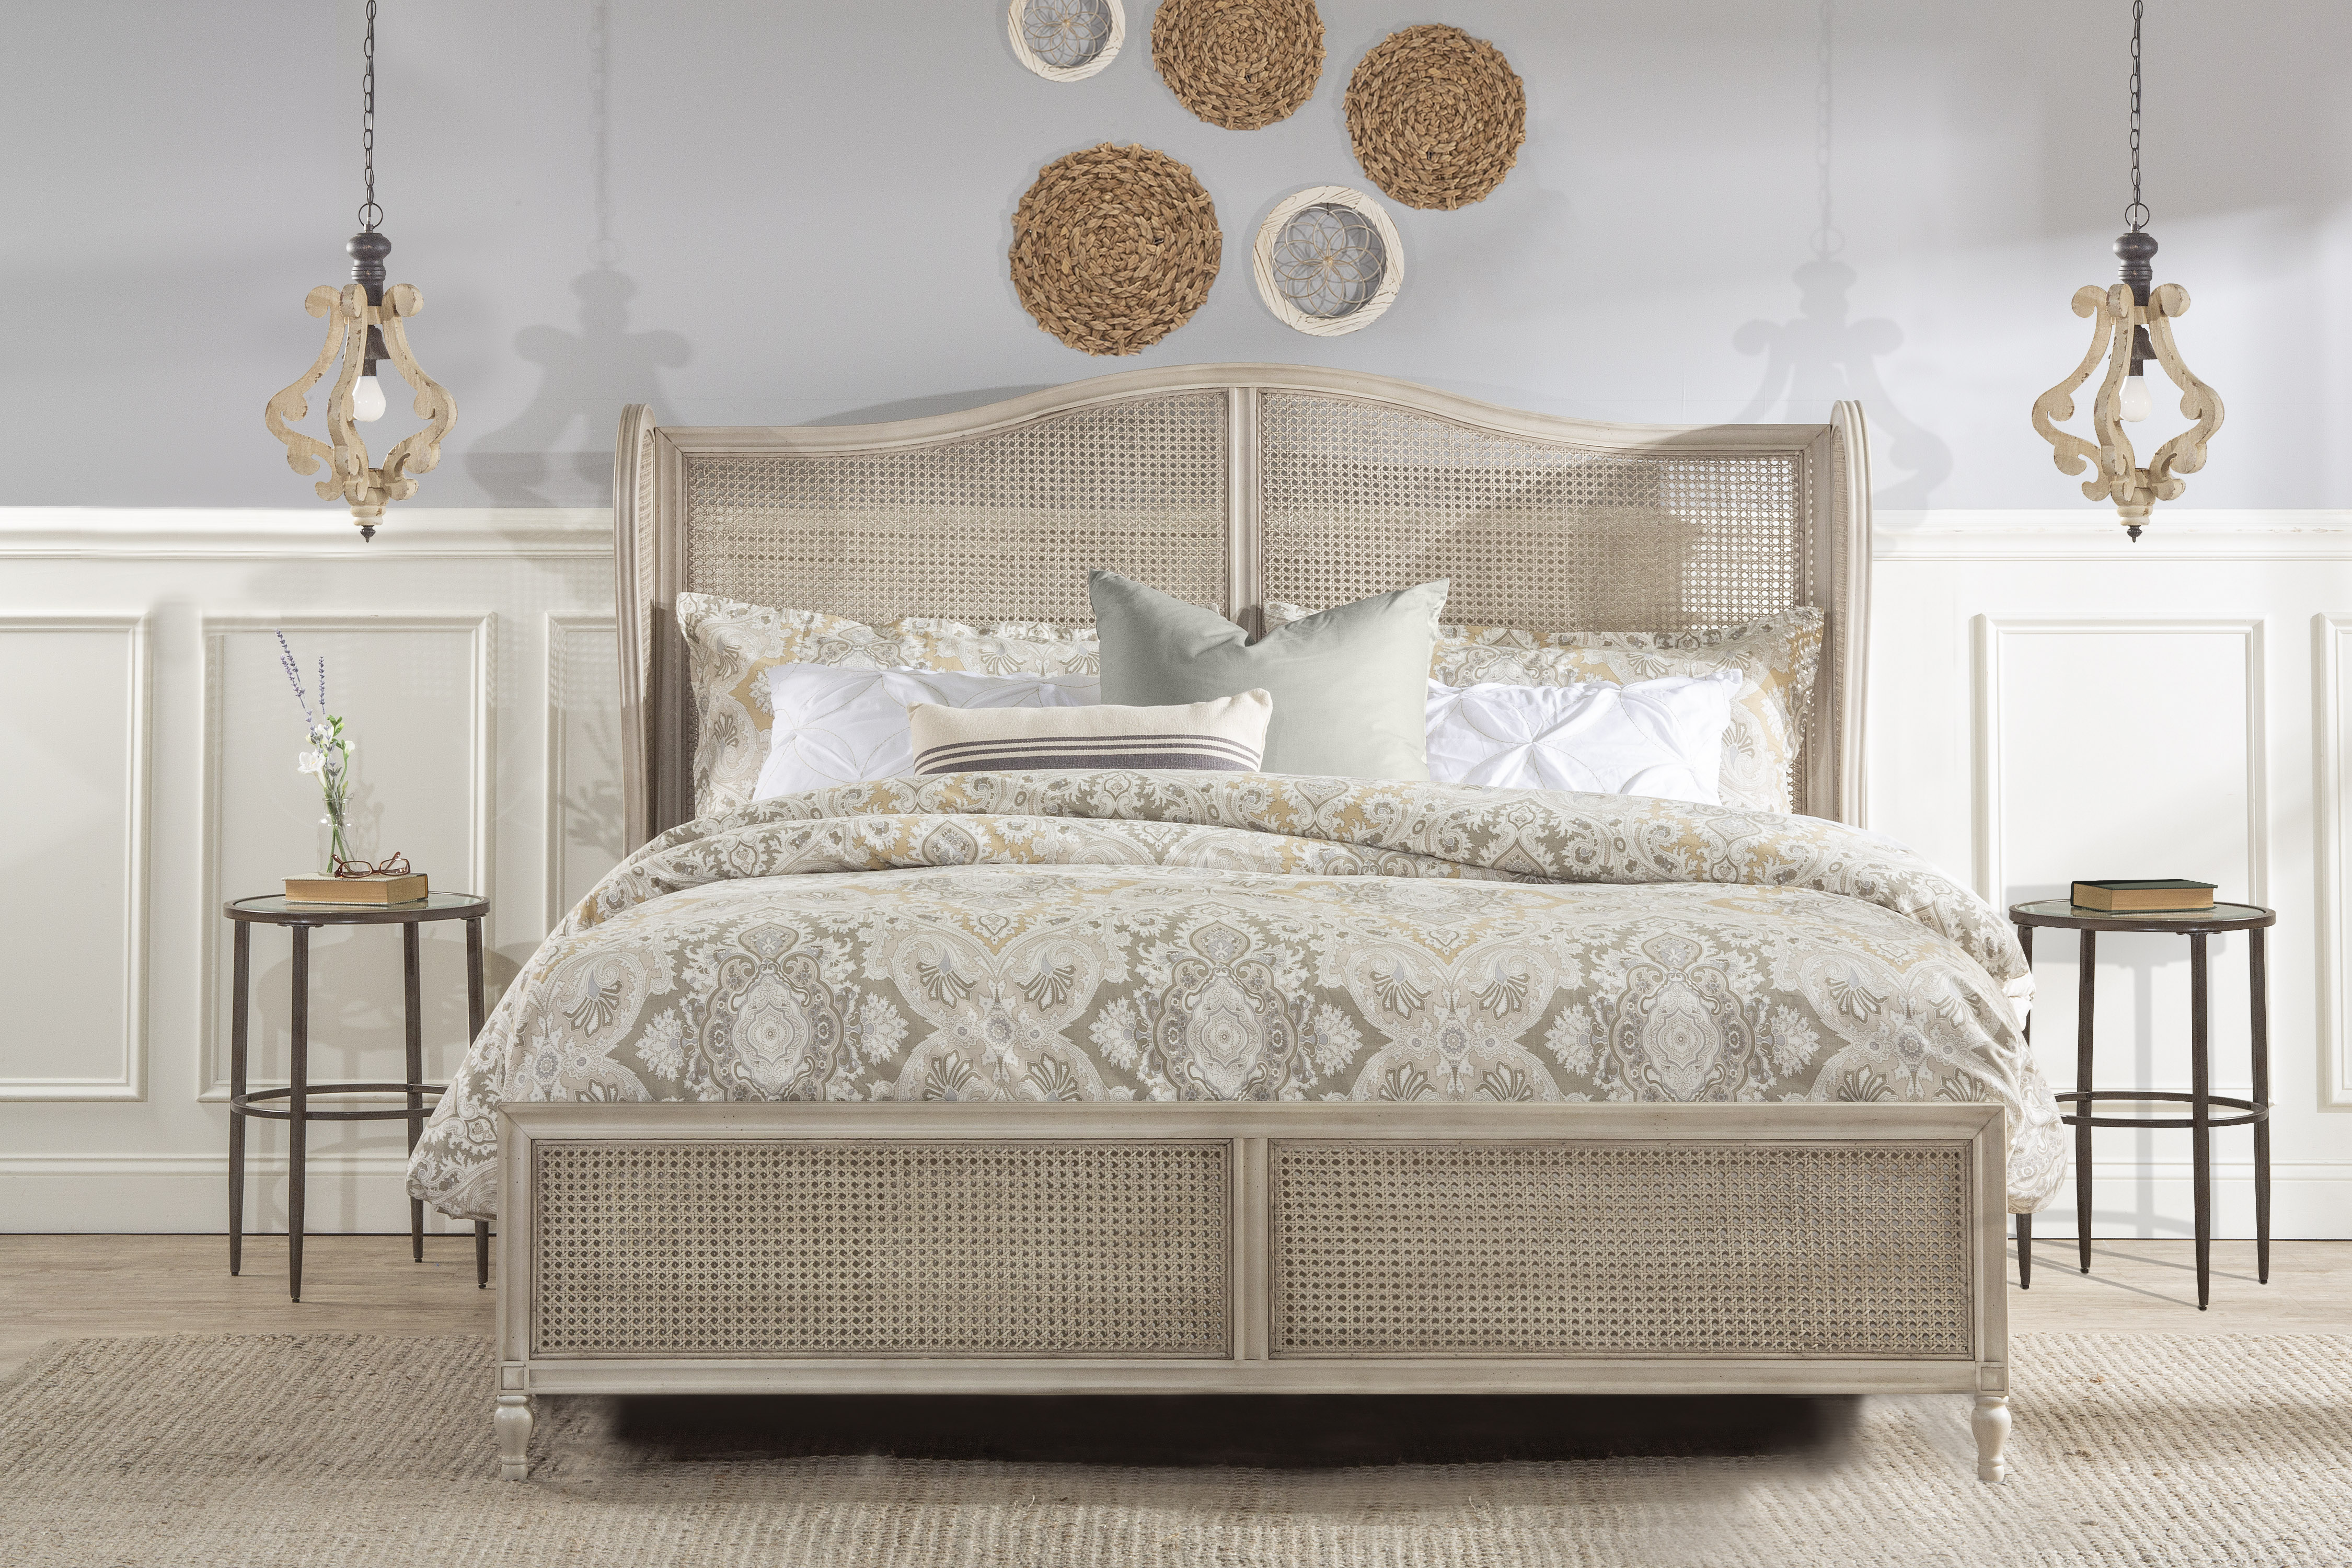 Hillsdale Furniture Sausalito King Cane Bed, Antique White 